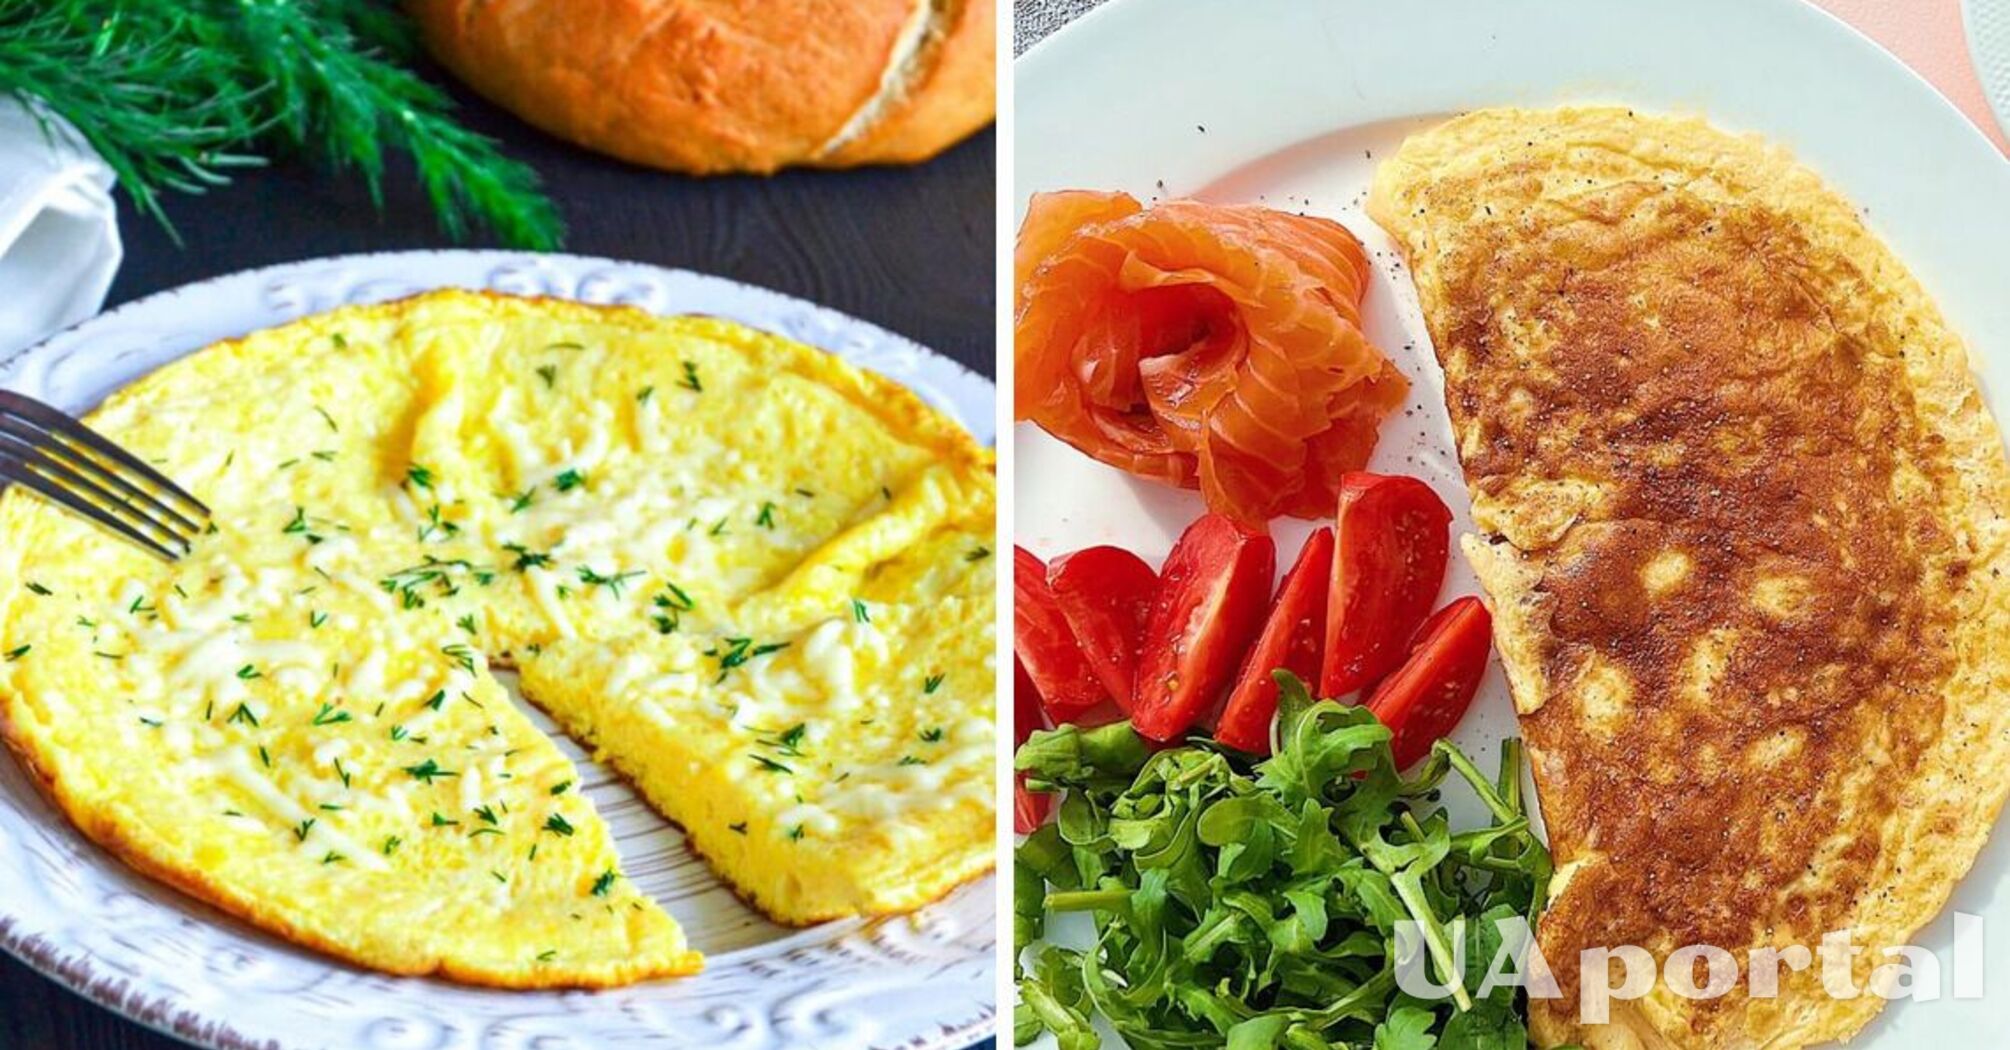 How to prepare an omelet to make it more delicious